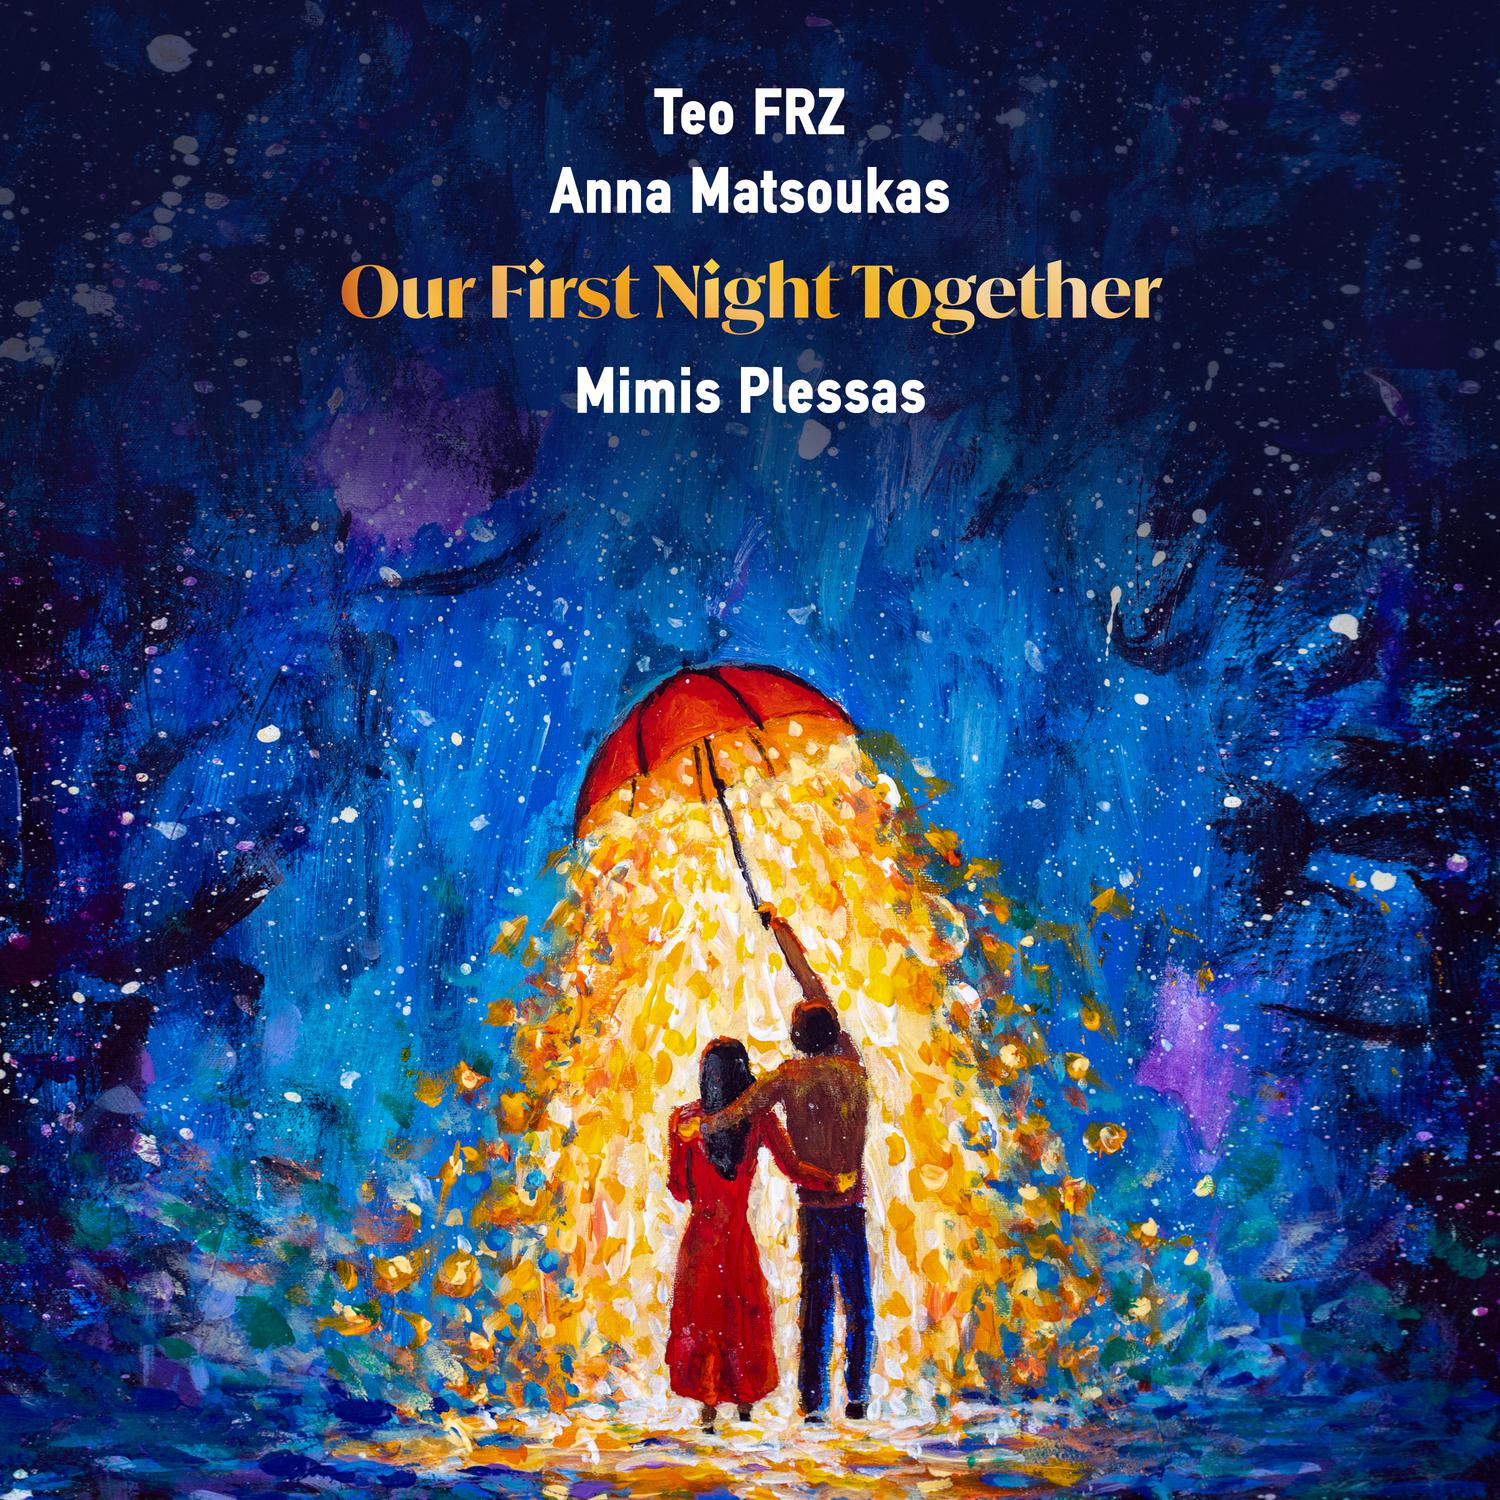 Teo FRZ - Our First Night Together